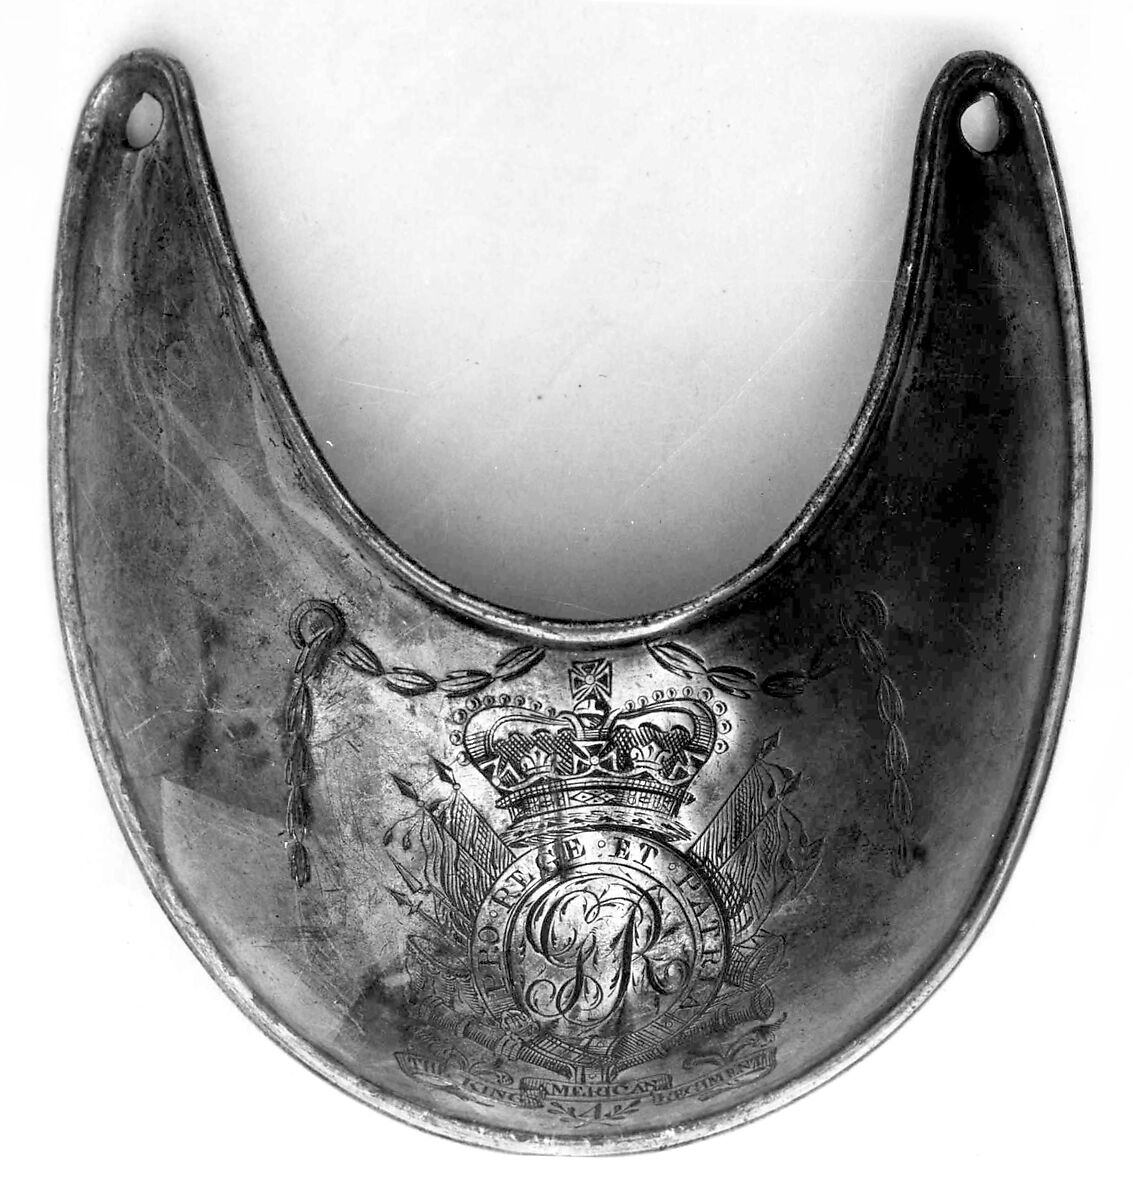 Gorget of an Officer of the King's American Regiment, Brass, gold, Anglo-American